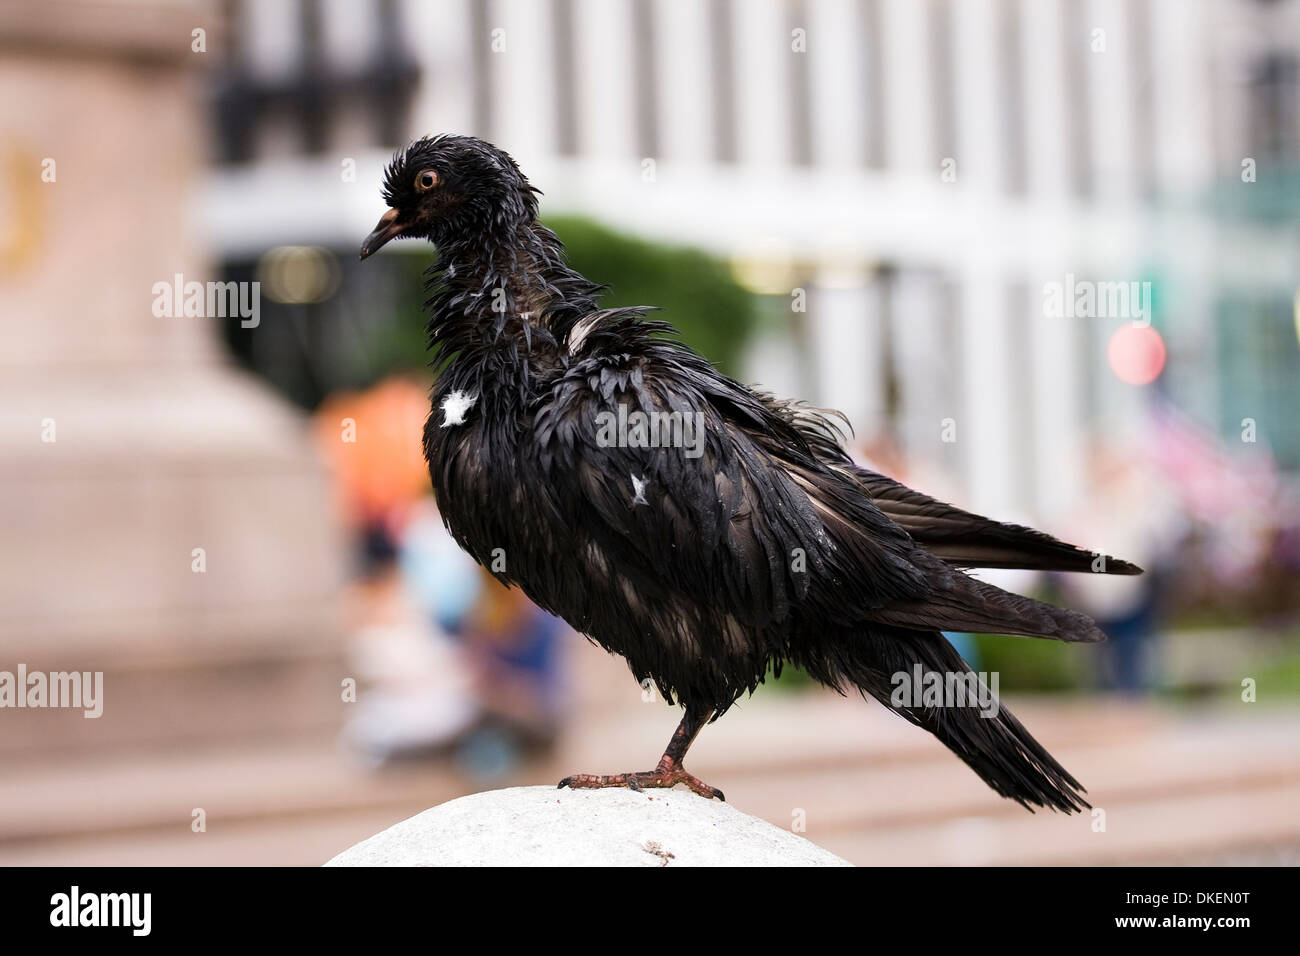 Wet and dirty one legged Rock Pigeon that is diseased and ailing from the effects of an illness Stock Photo